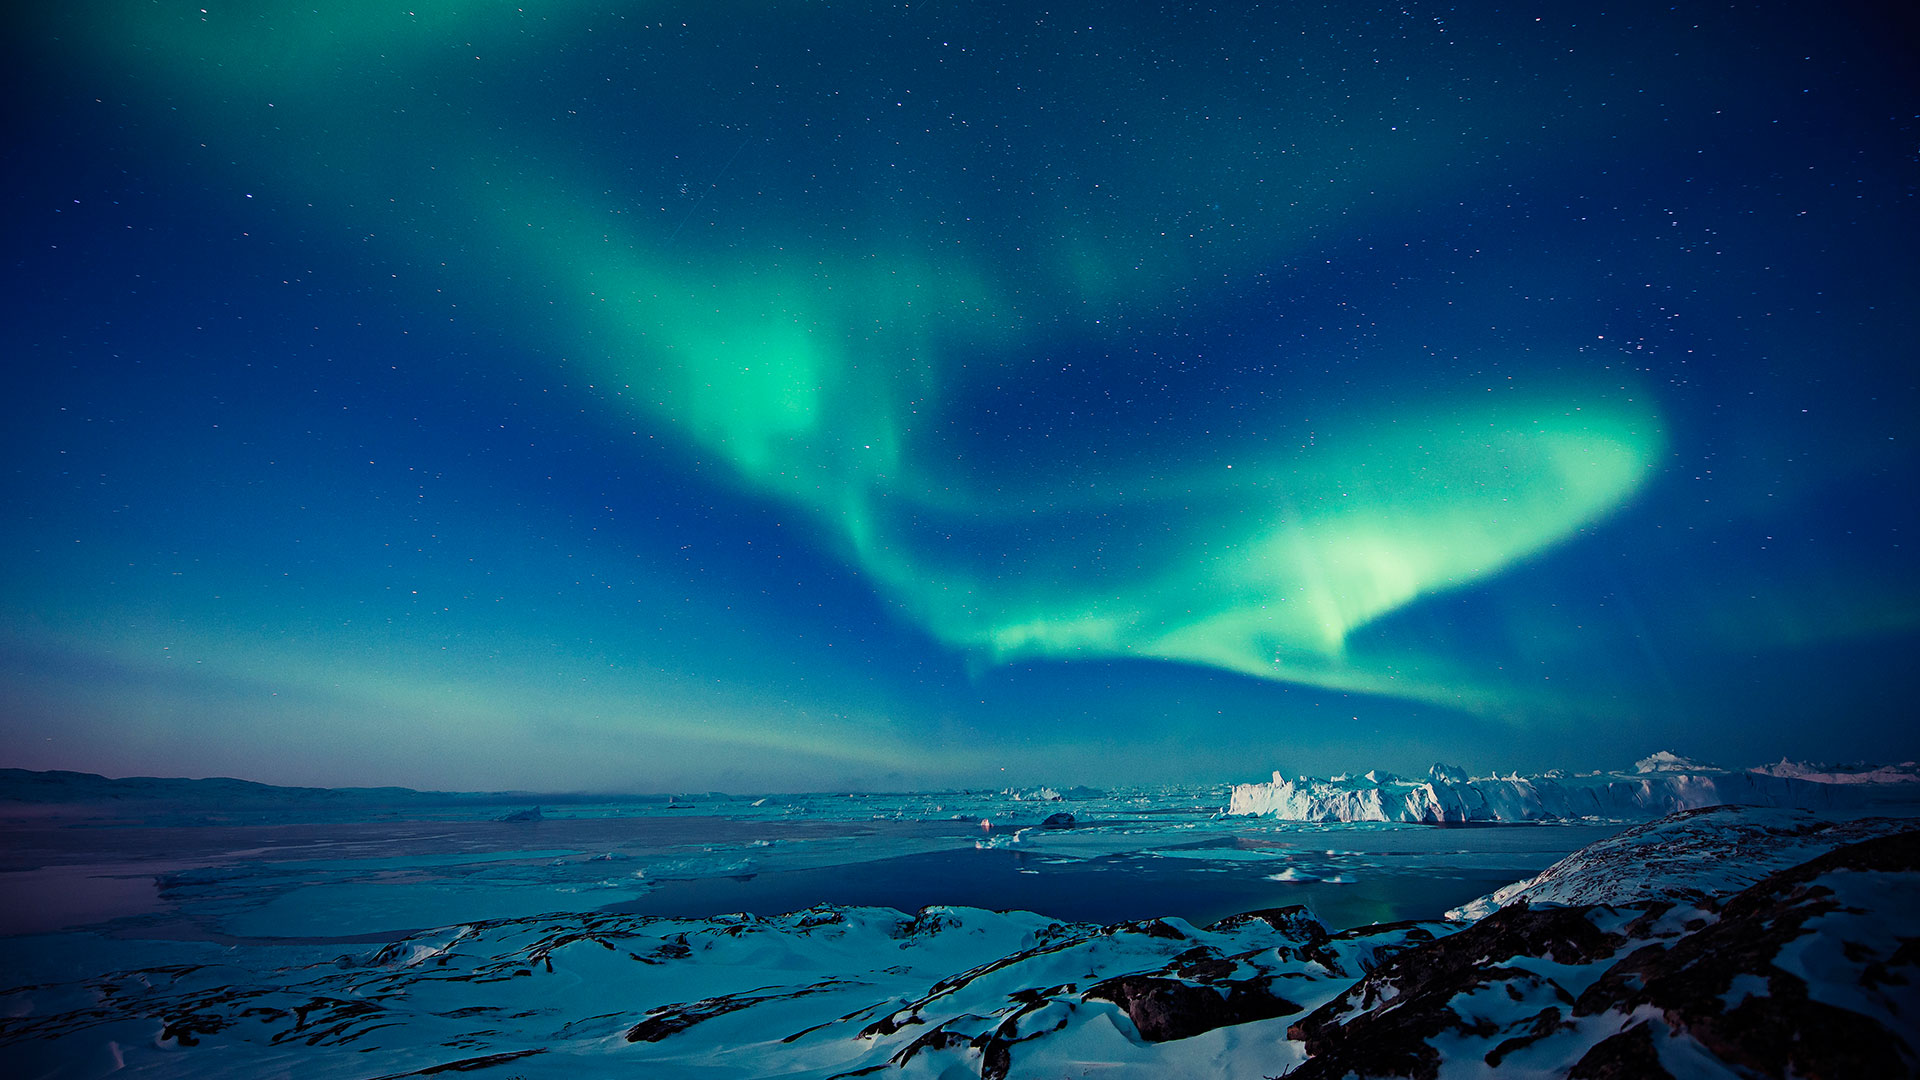 Northern lights above the Ilulissat icefjord in Greenland © André Schoenherr